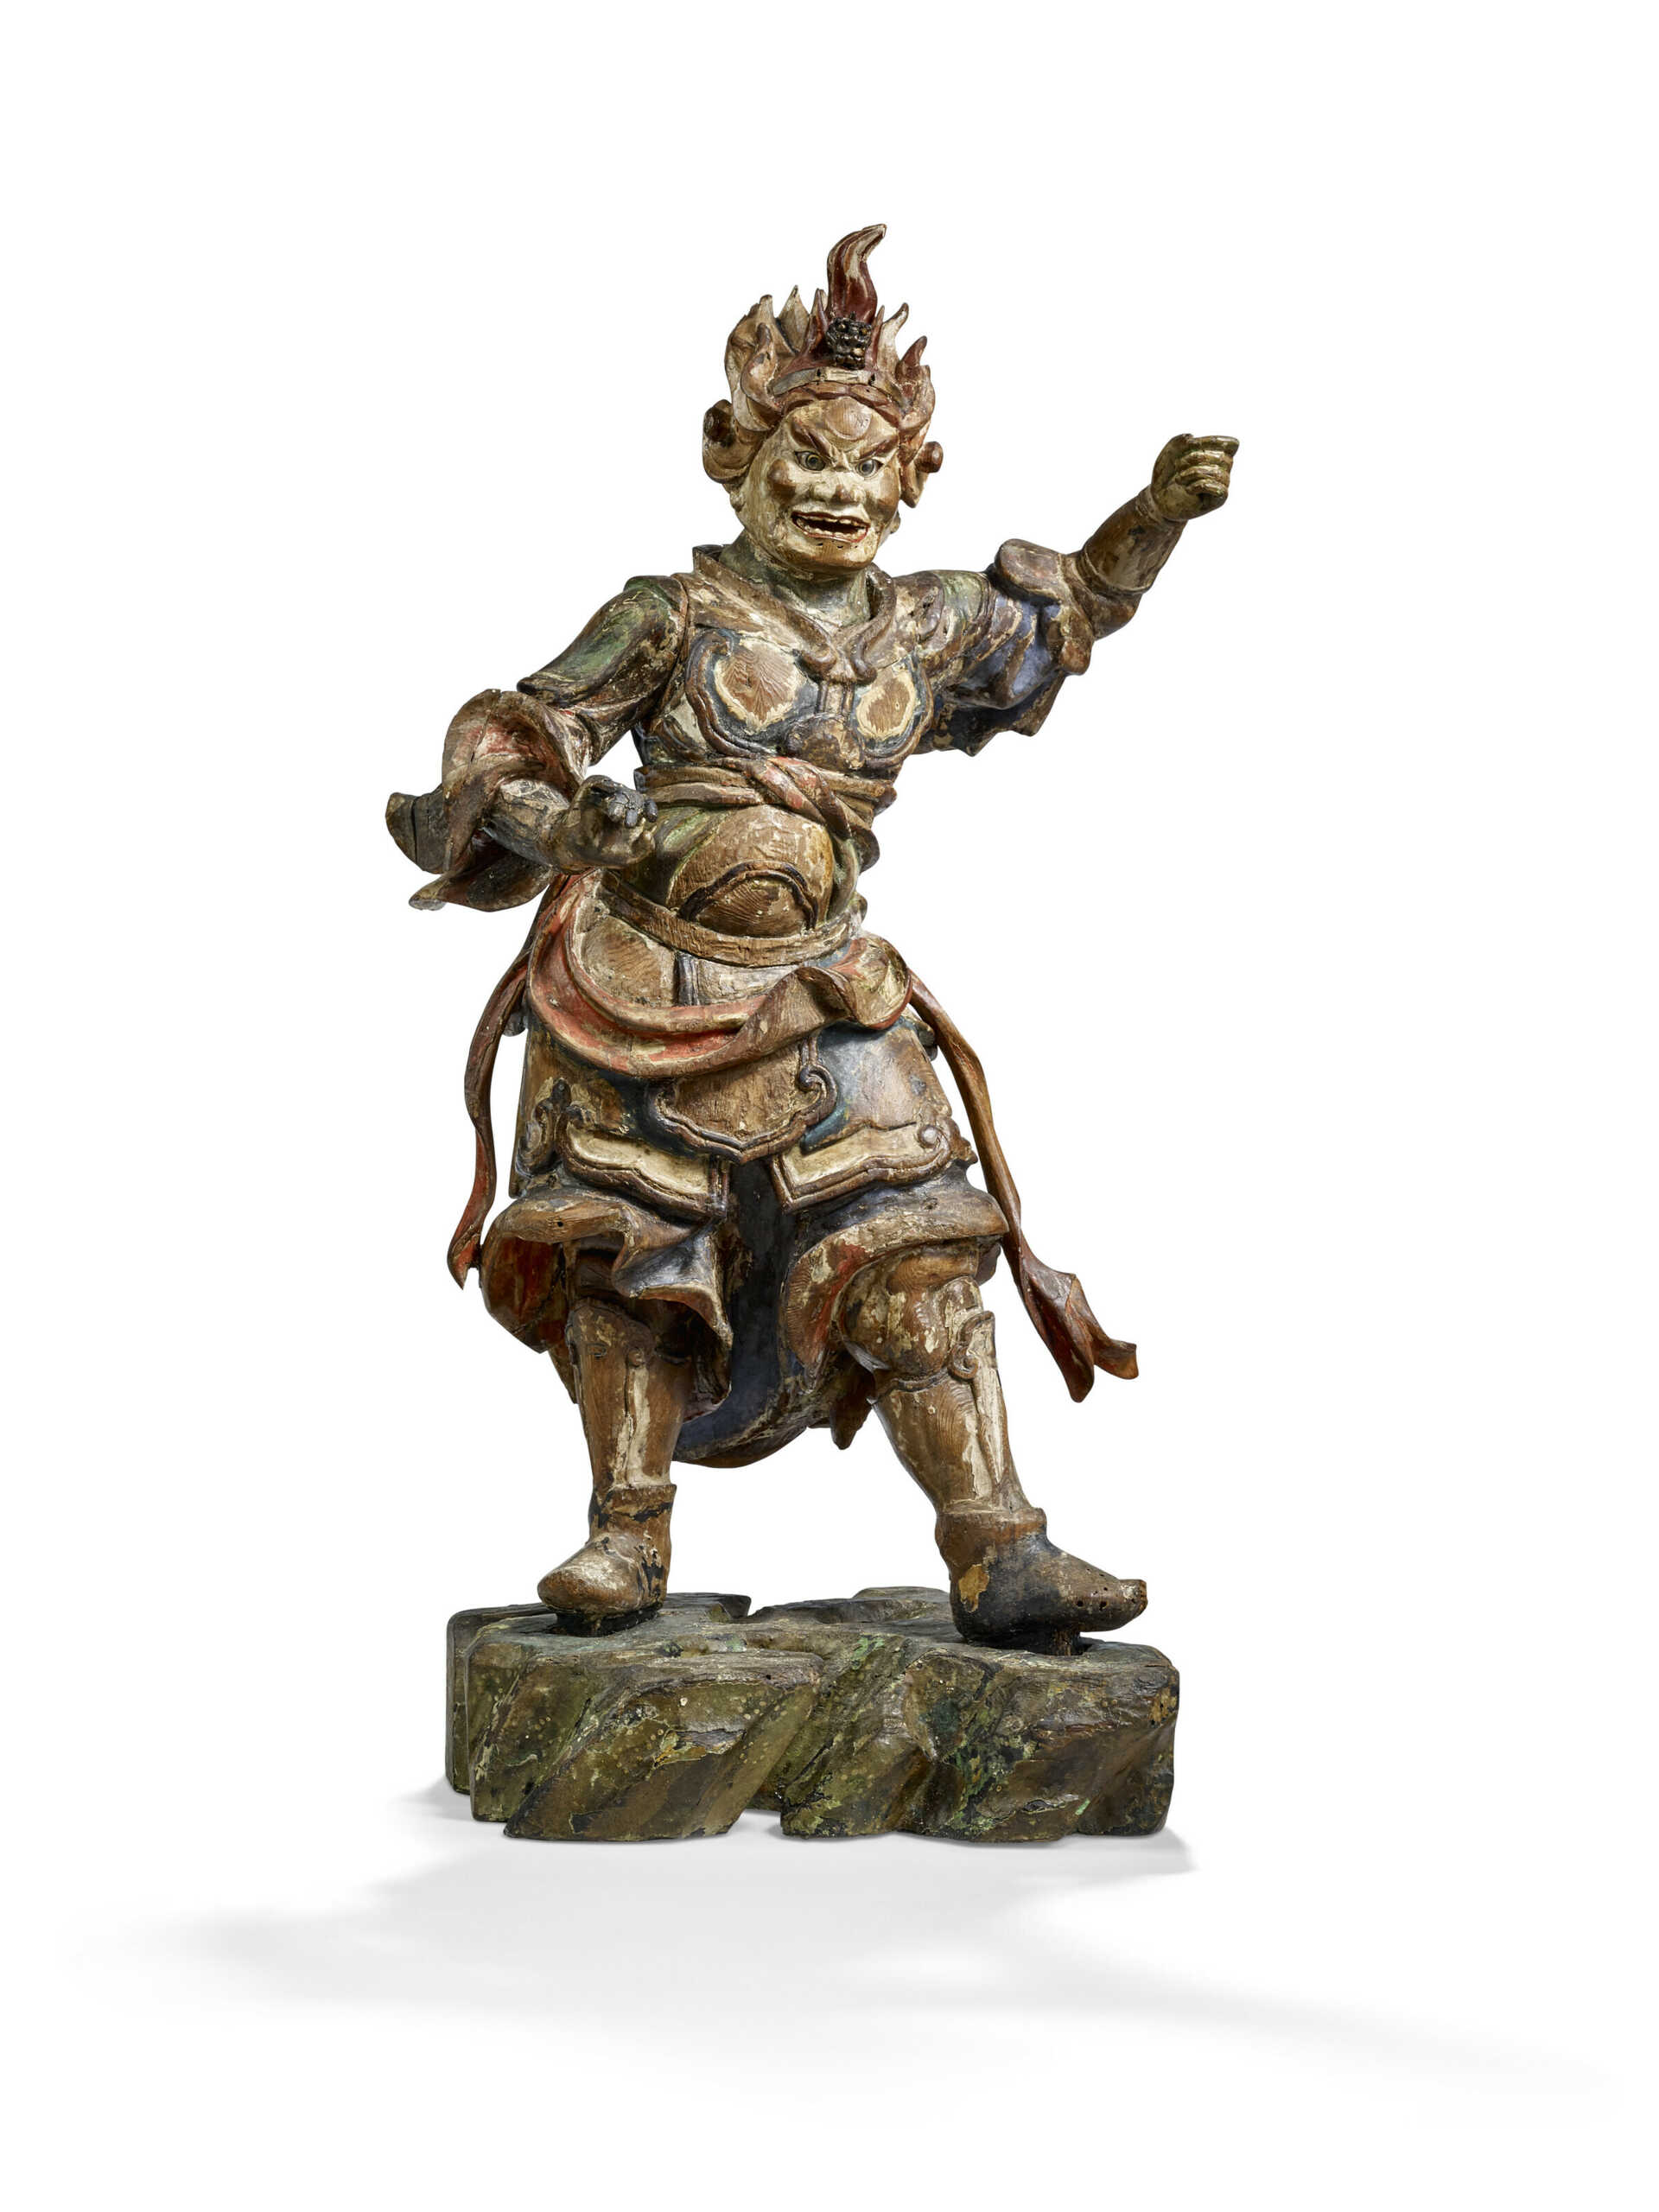 A LACQUERED WOOD FIGURE OF THE DIVINE GENERAL ANILA (ANIRA TAISHO)